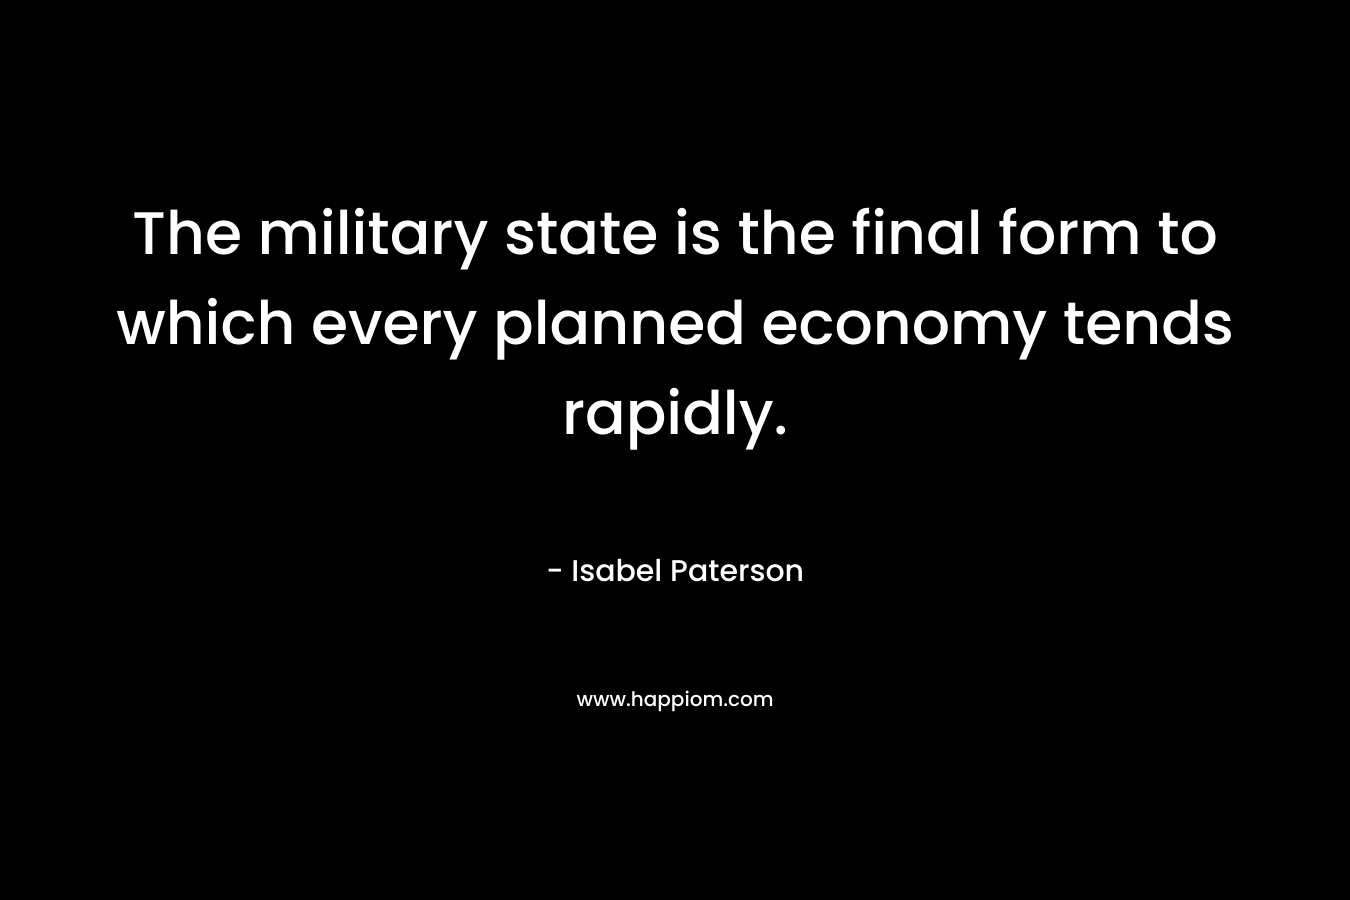 The military state is the final form to which every planned economy tends rapidly.